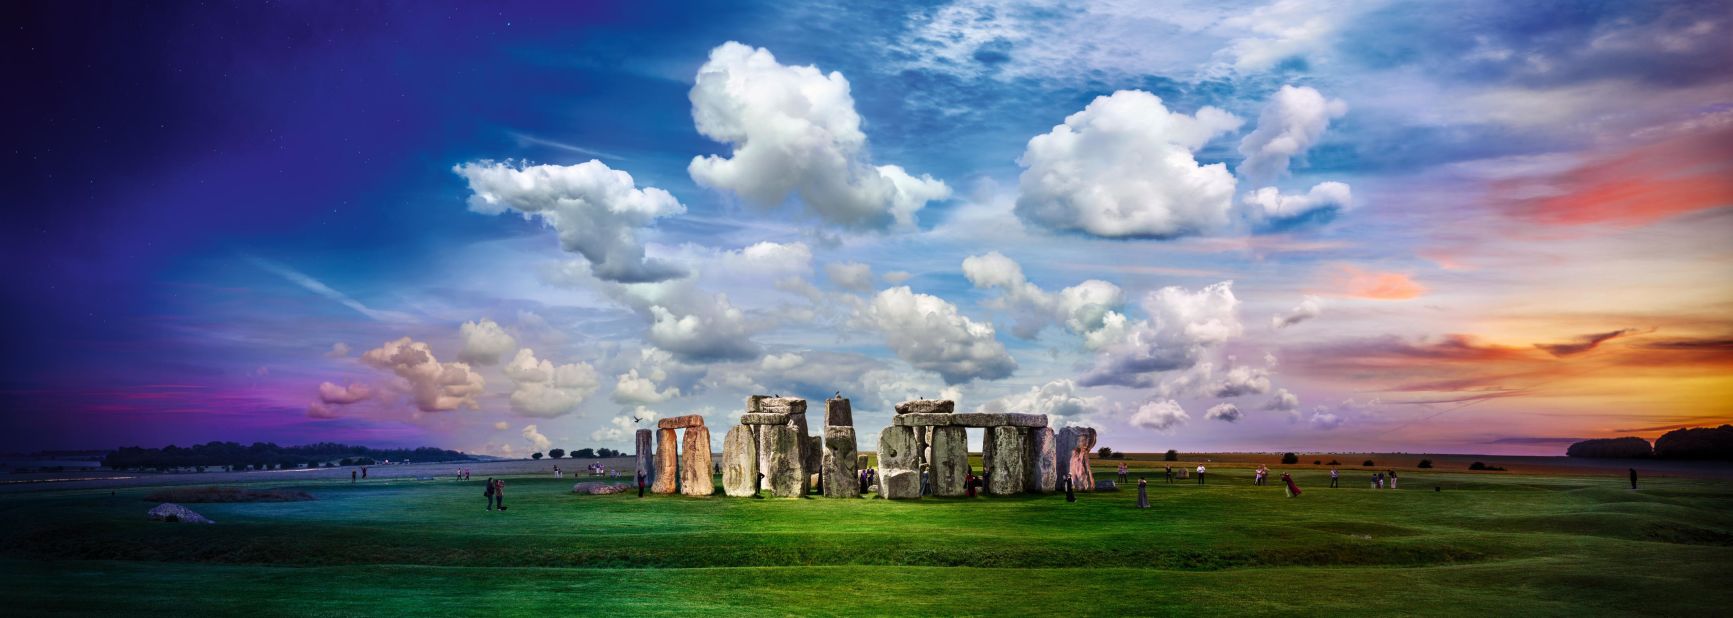 Wilkes photographed Stonehenge during a rare pagan wedding.